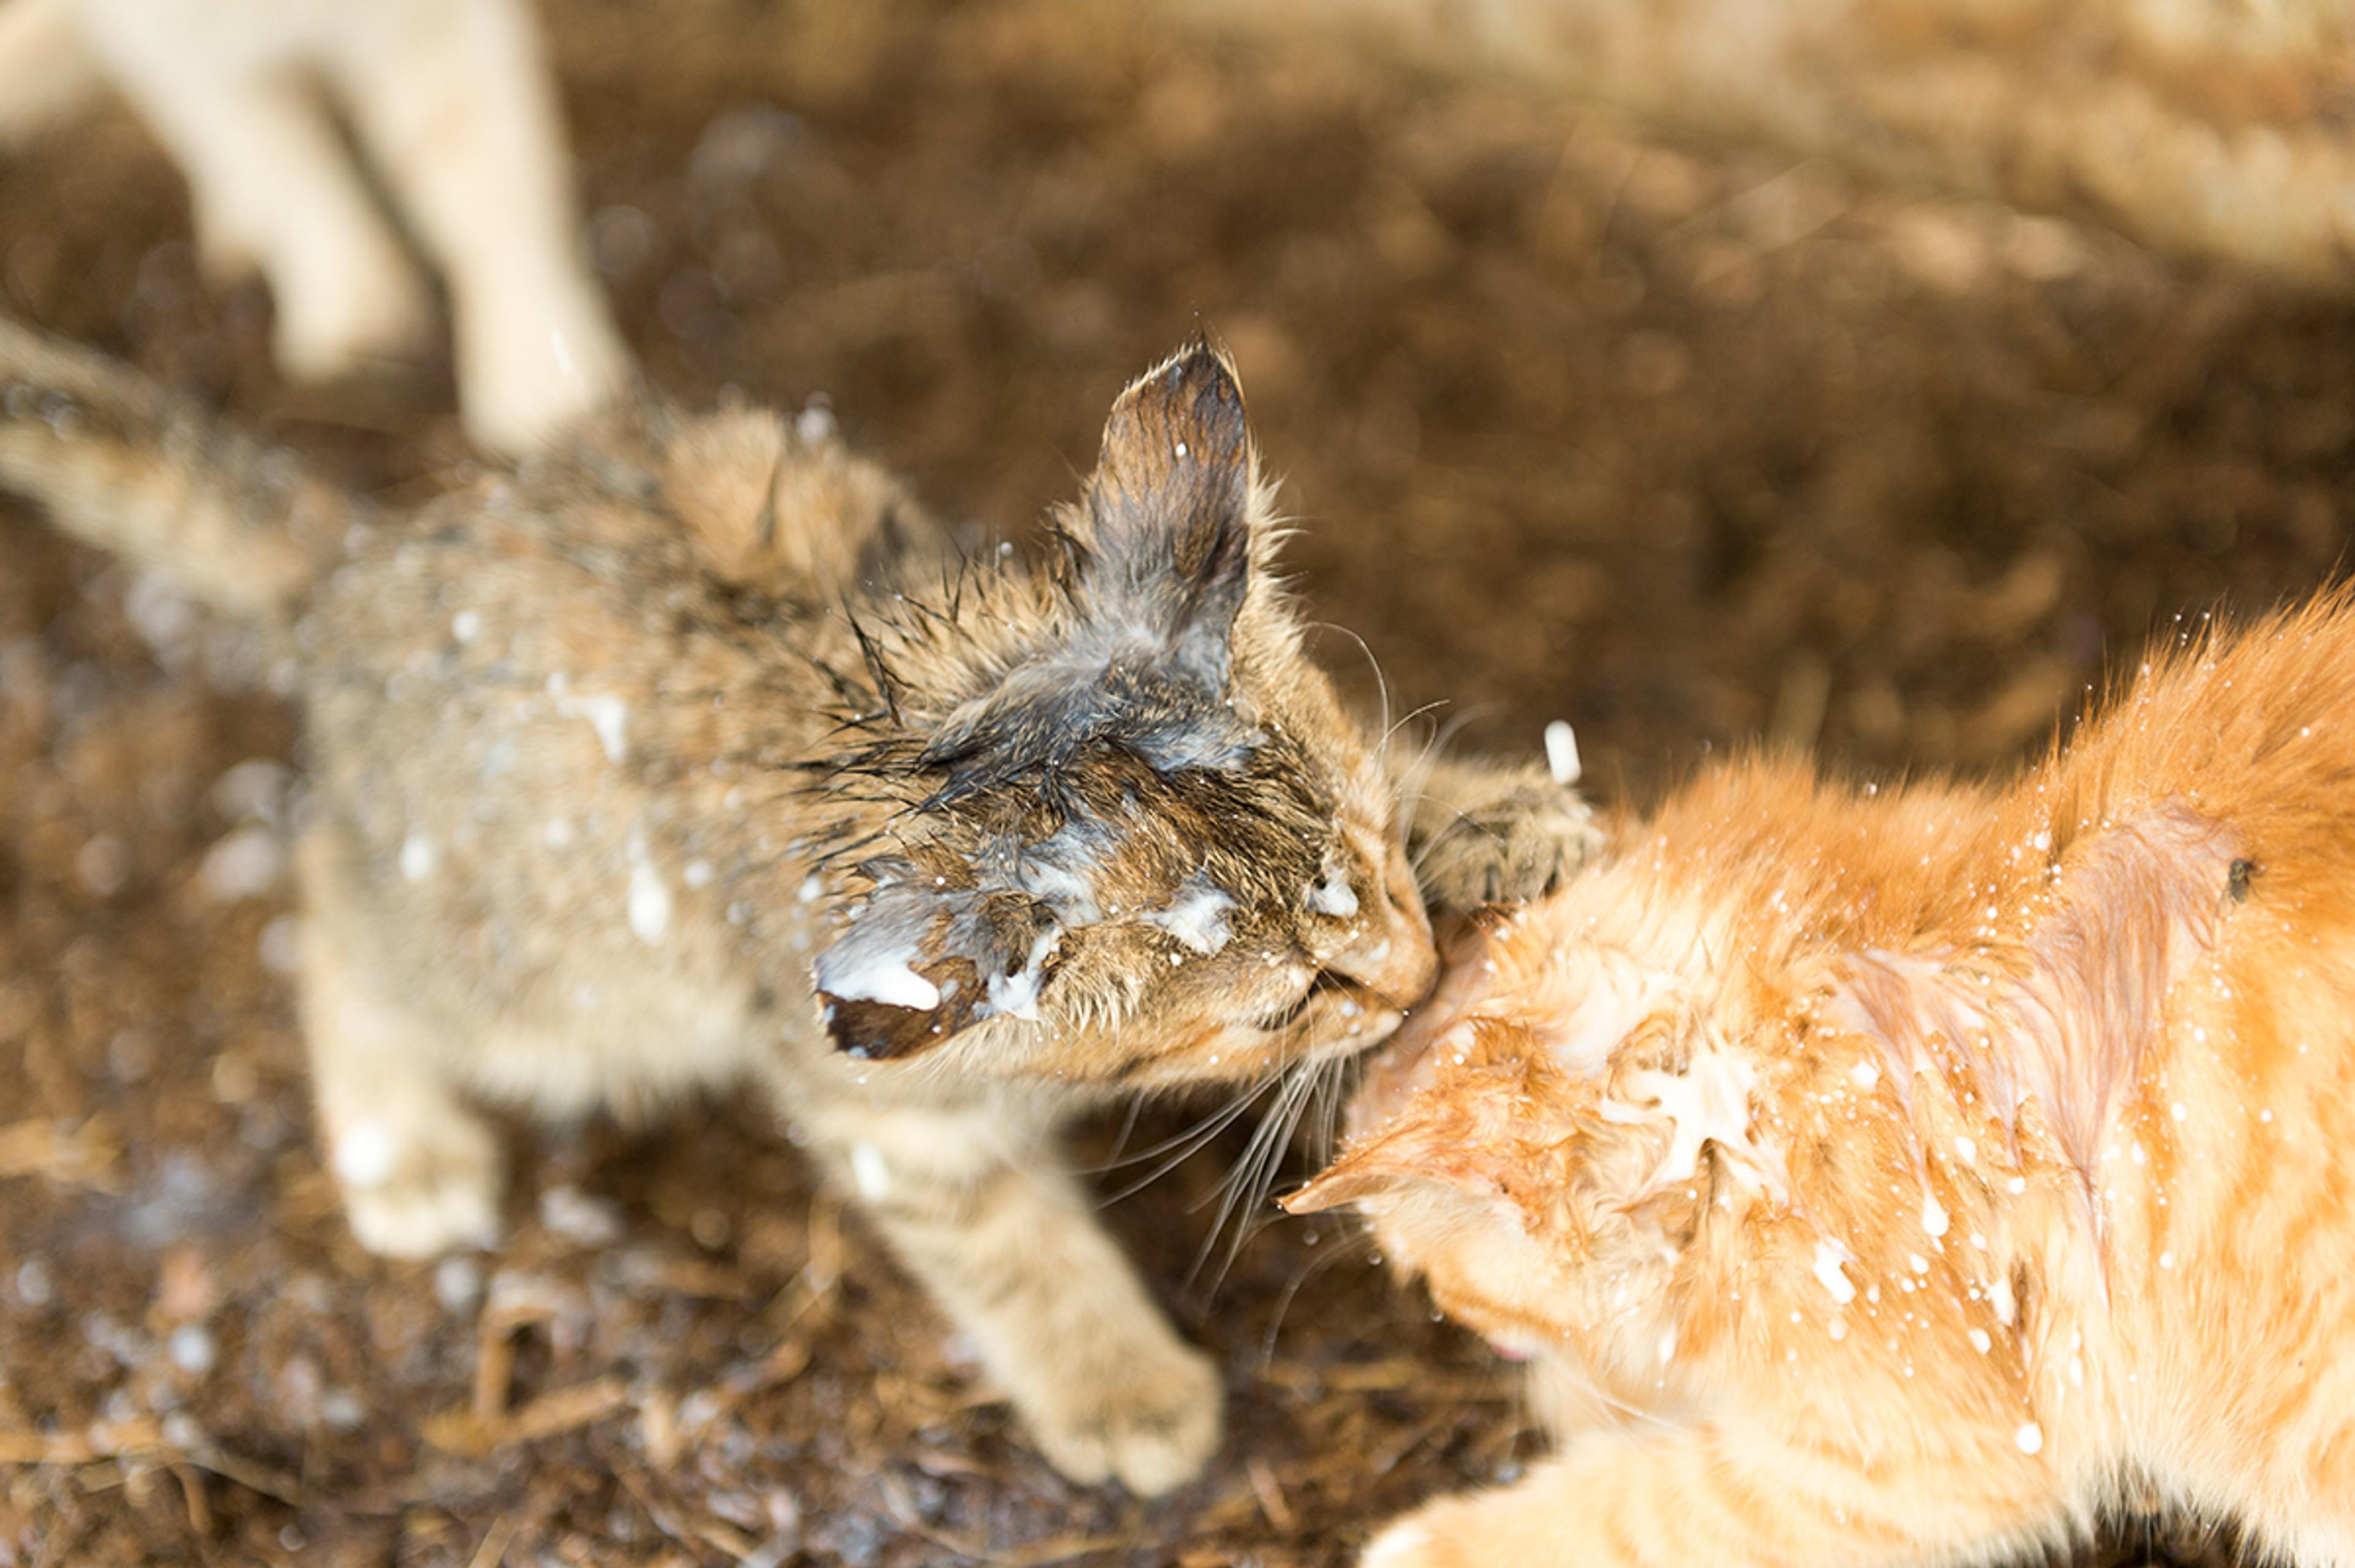 A kitten covered in milk licks the head of another kitten also covered in milk.